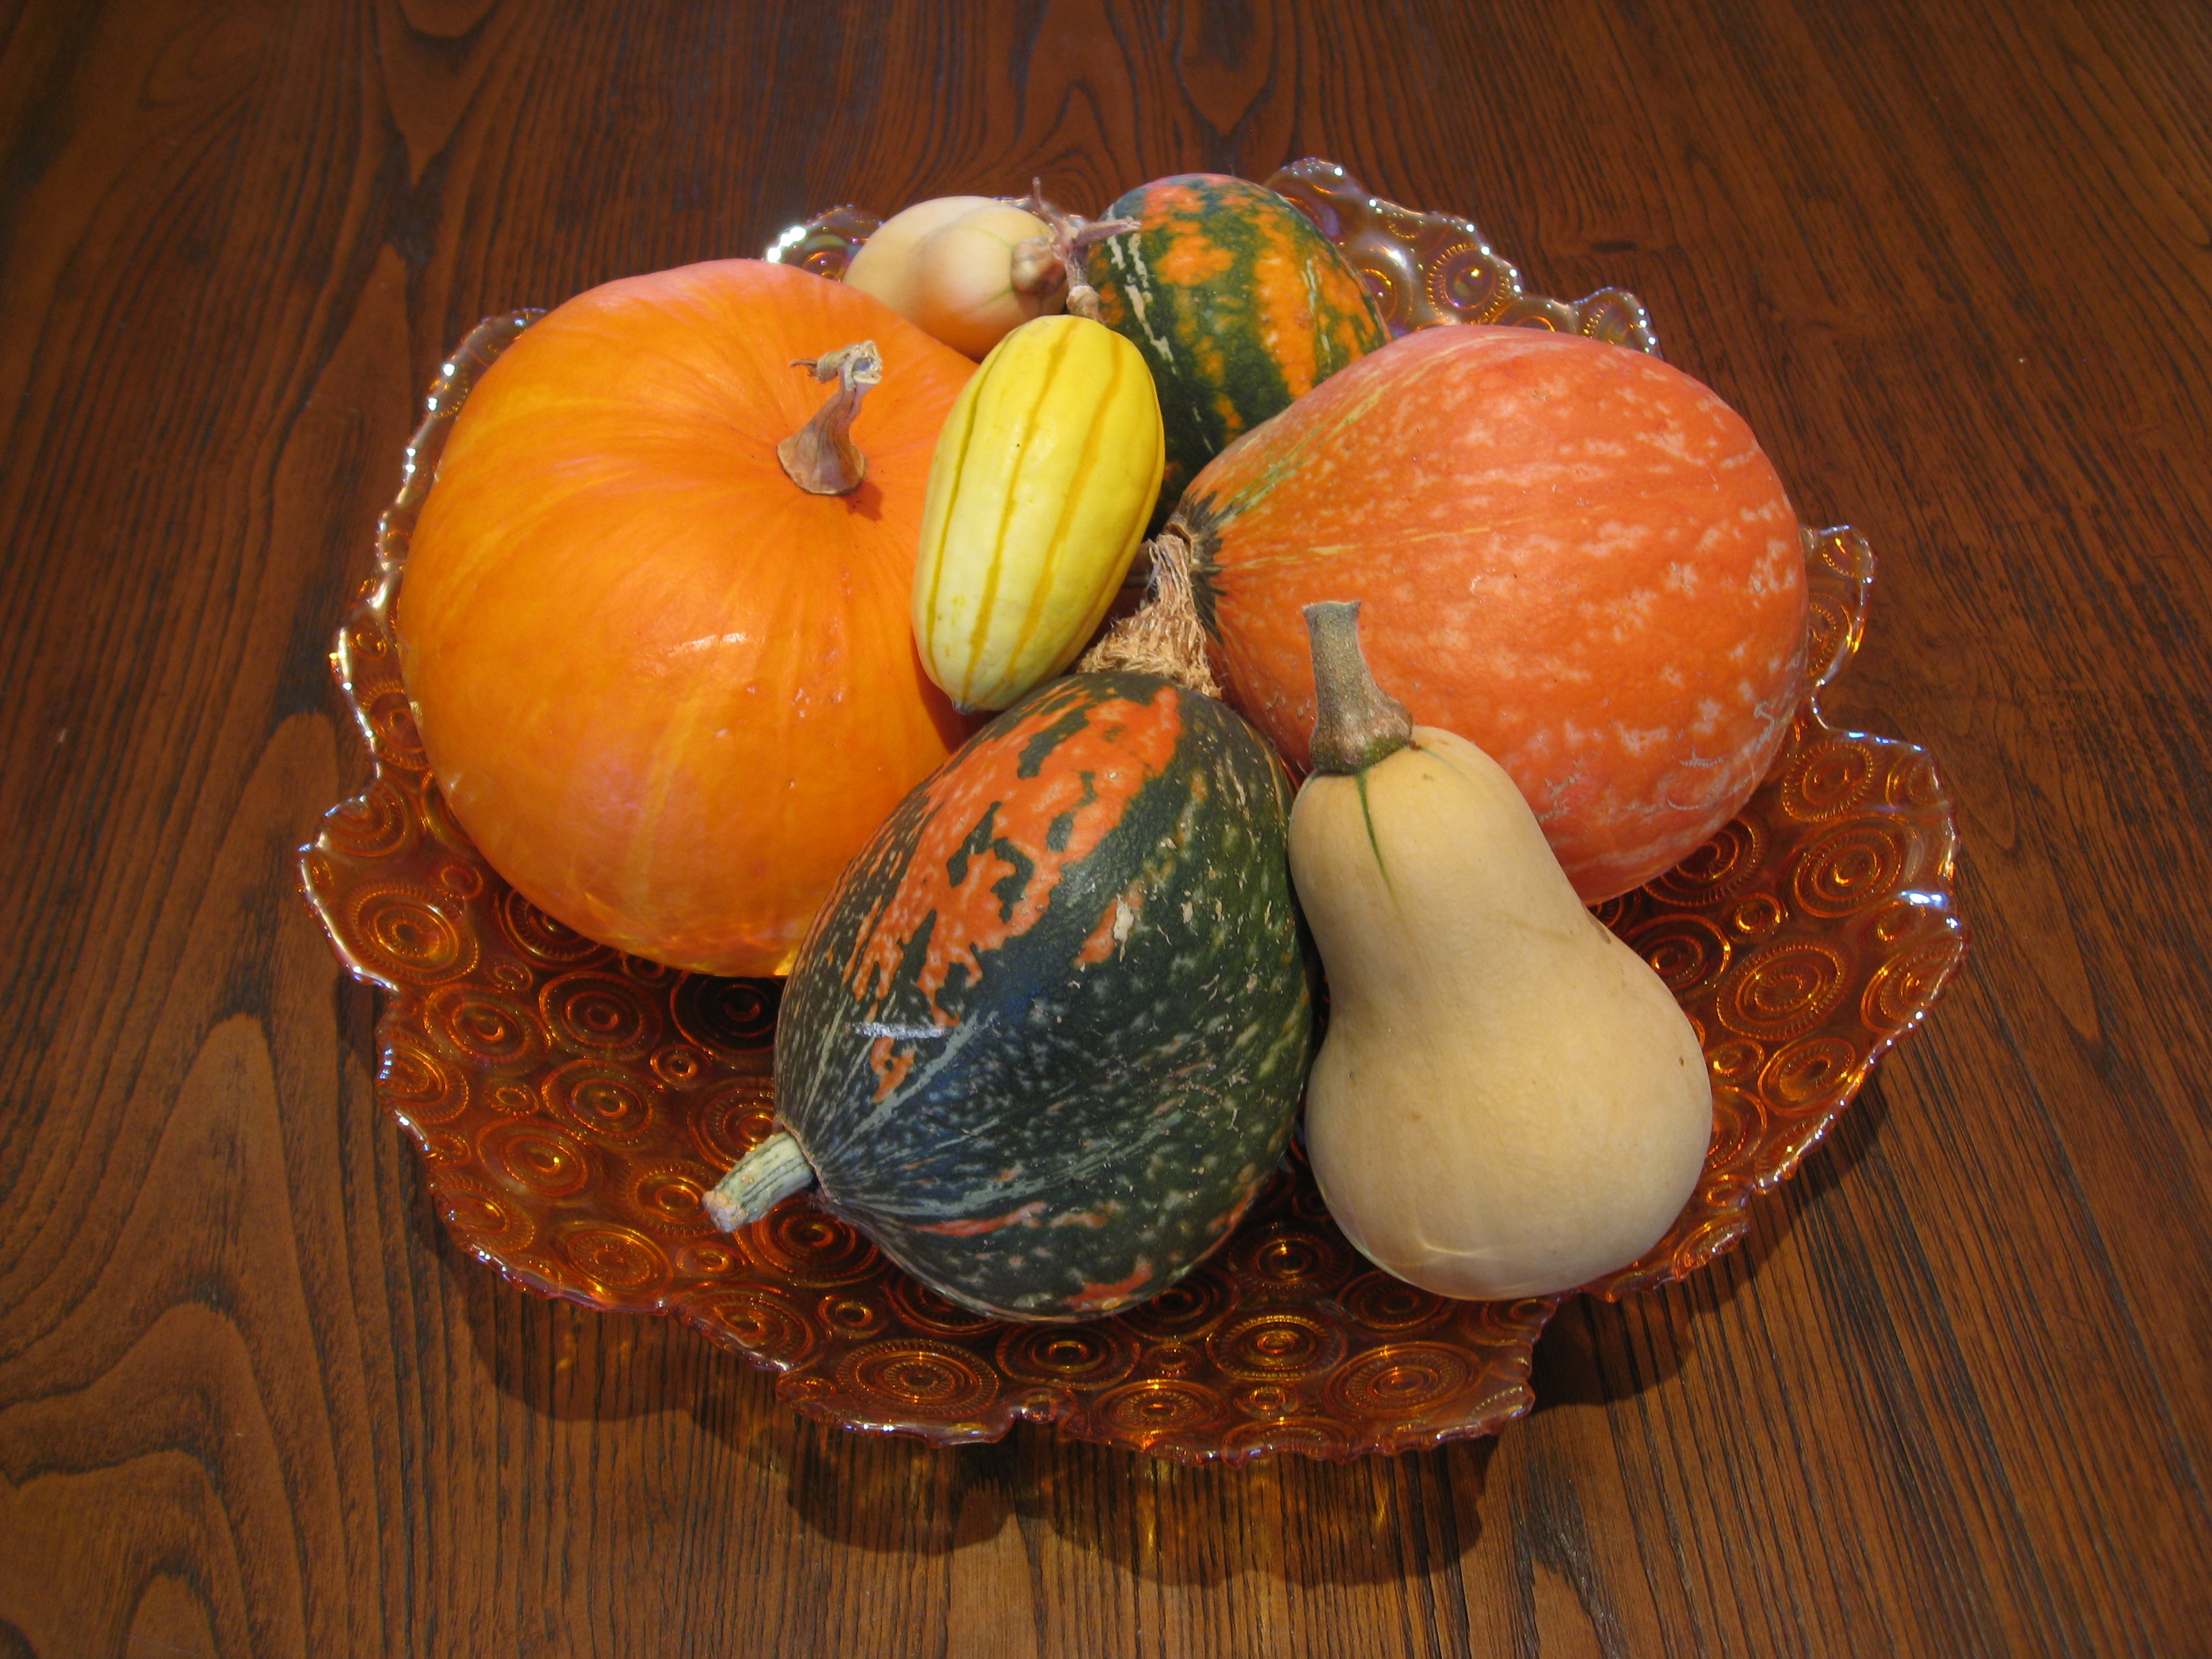 Small squash makes a great centerpiece